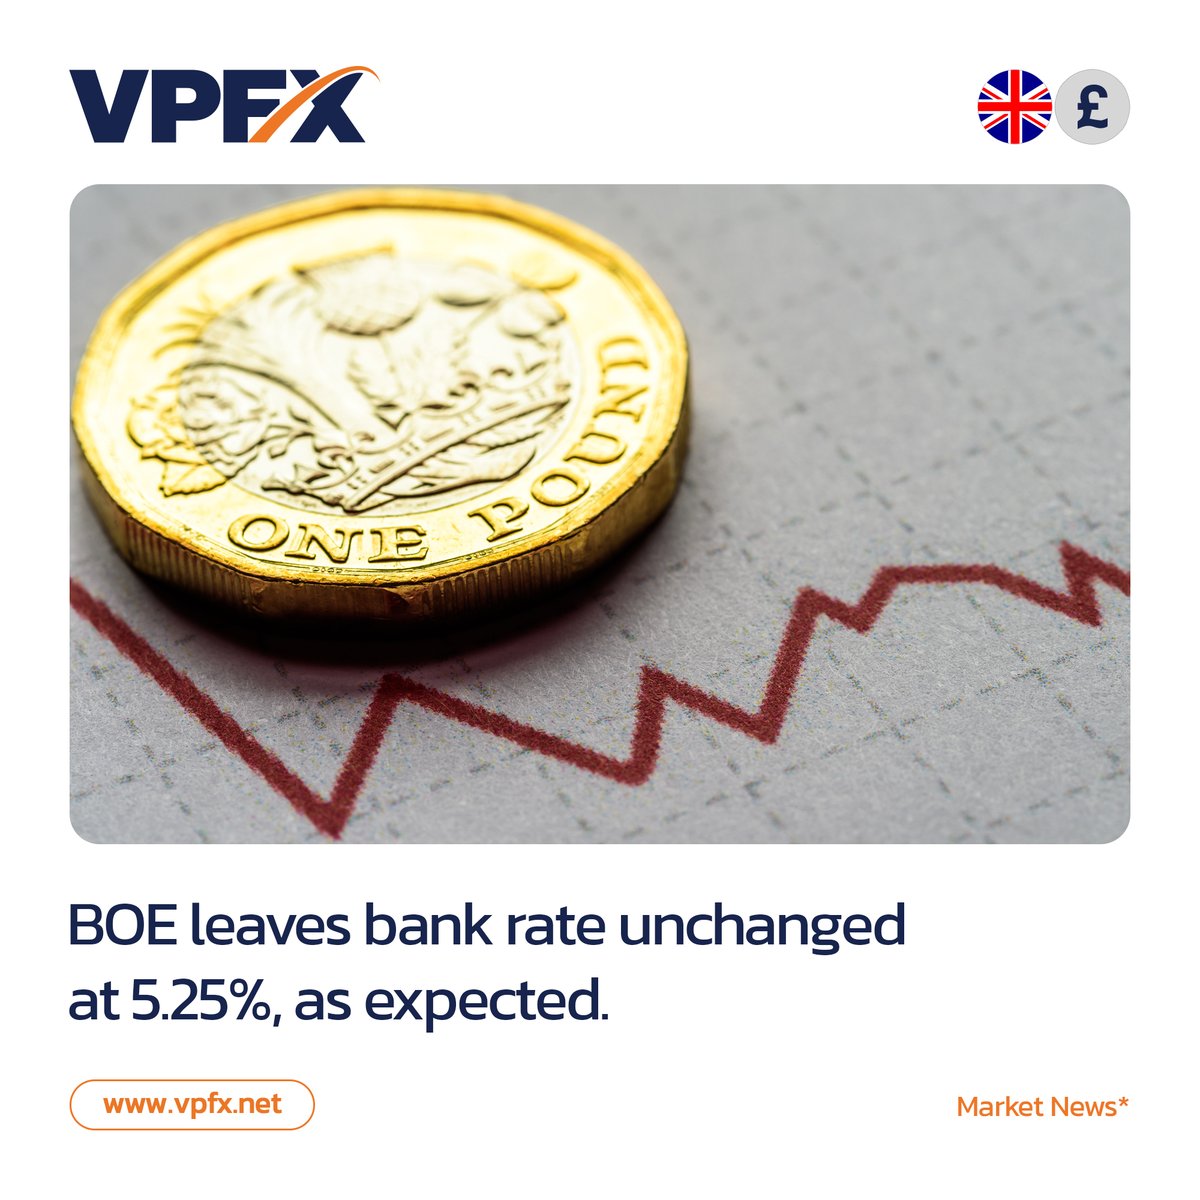 Bank of England (BOE) monetary policy committee members vote on where to set the rate. #vpfx #bankofengland #england🇬🇧 #bank #rate #forexnews #forexmarket #forexbroker